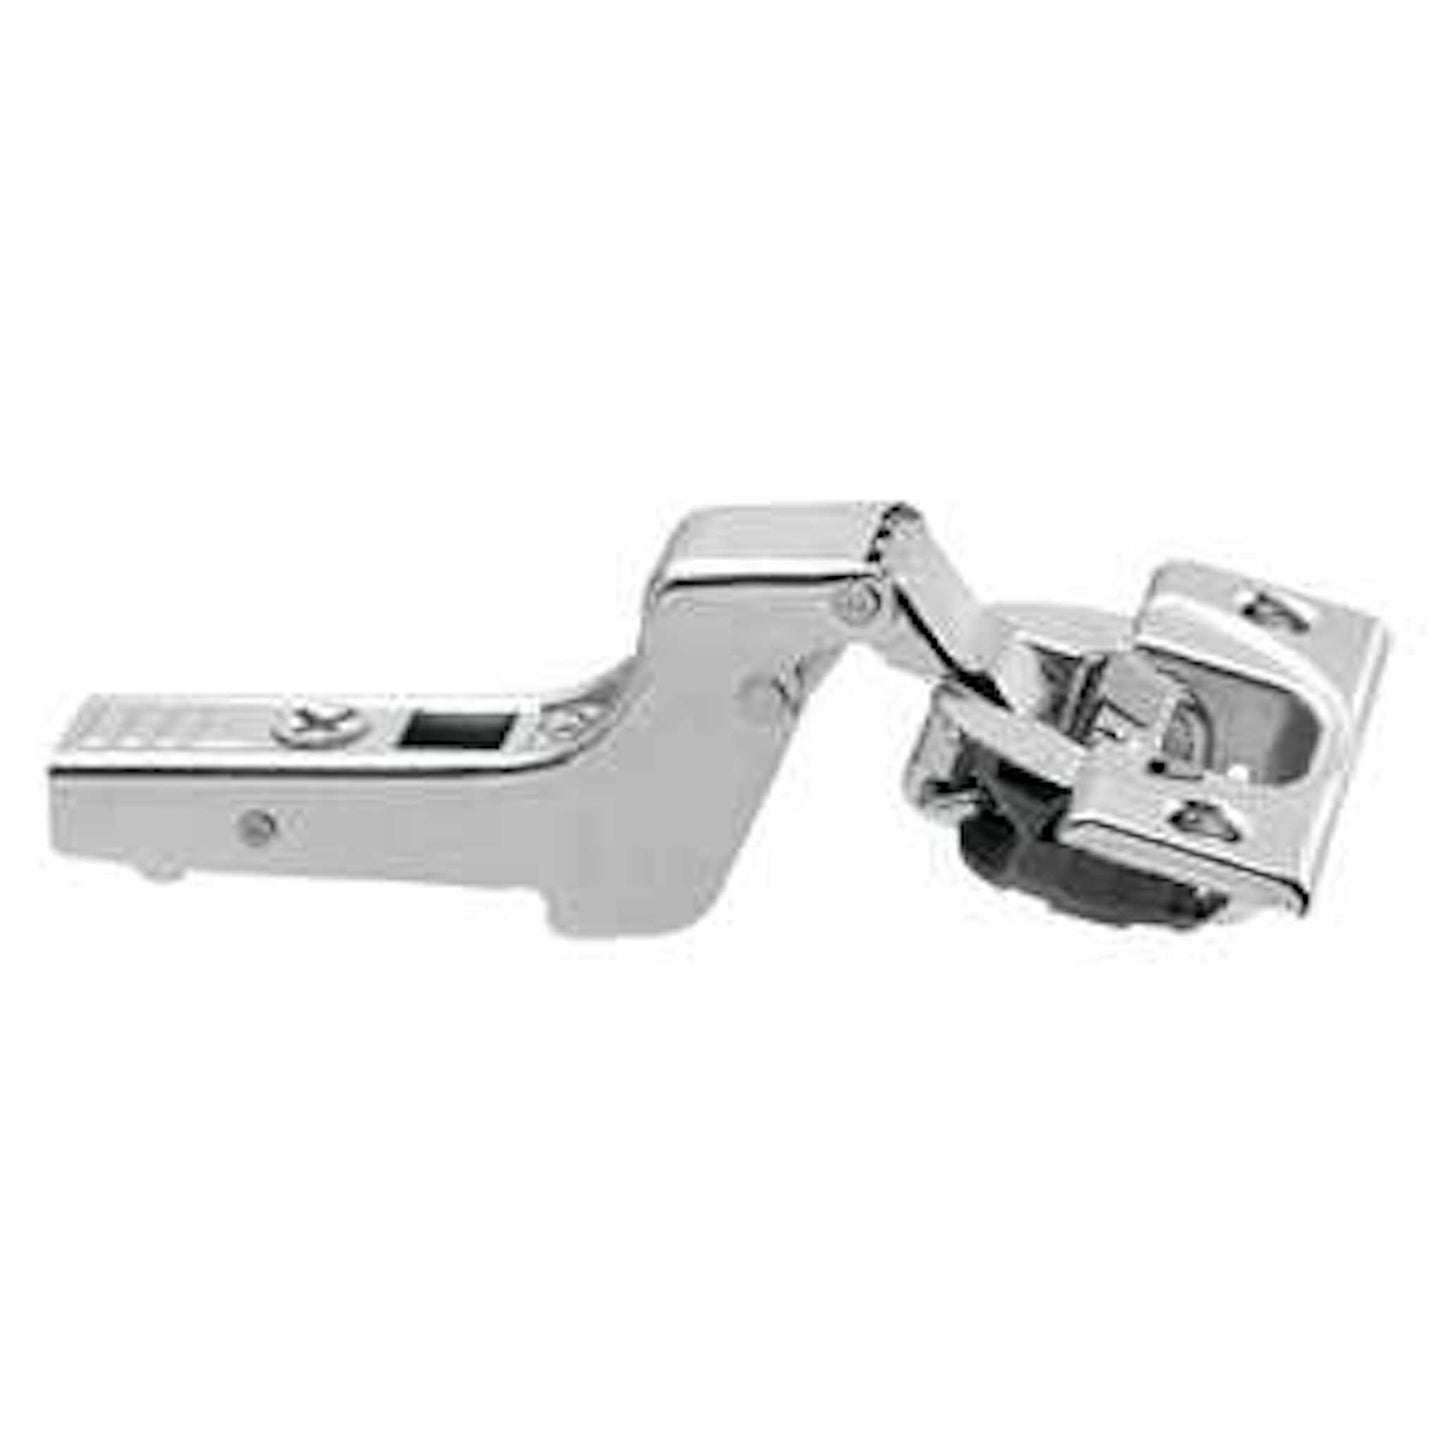 Clip Top 110° Opening Hinge with BLUMOTION Soft-Closing, 45mm Bore Pattern, Inset, Nickel-Plated, Screw-On